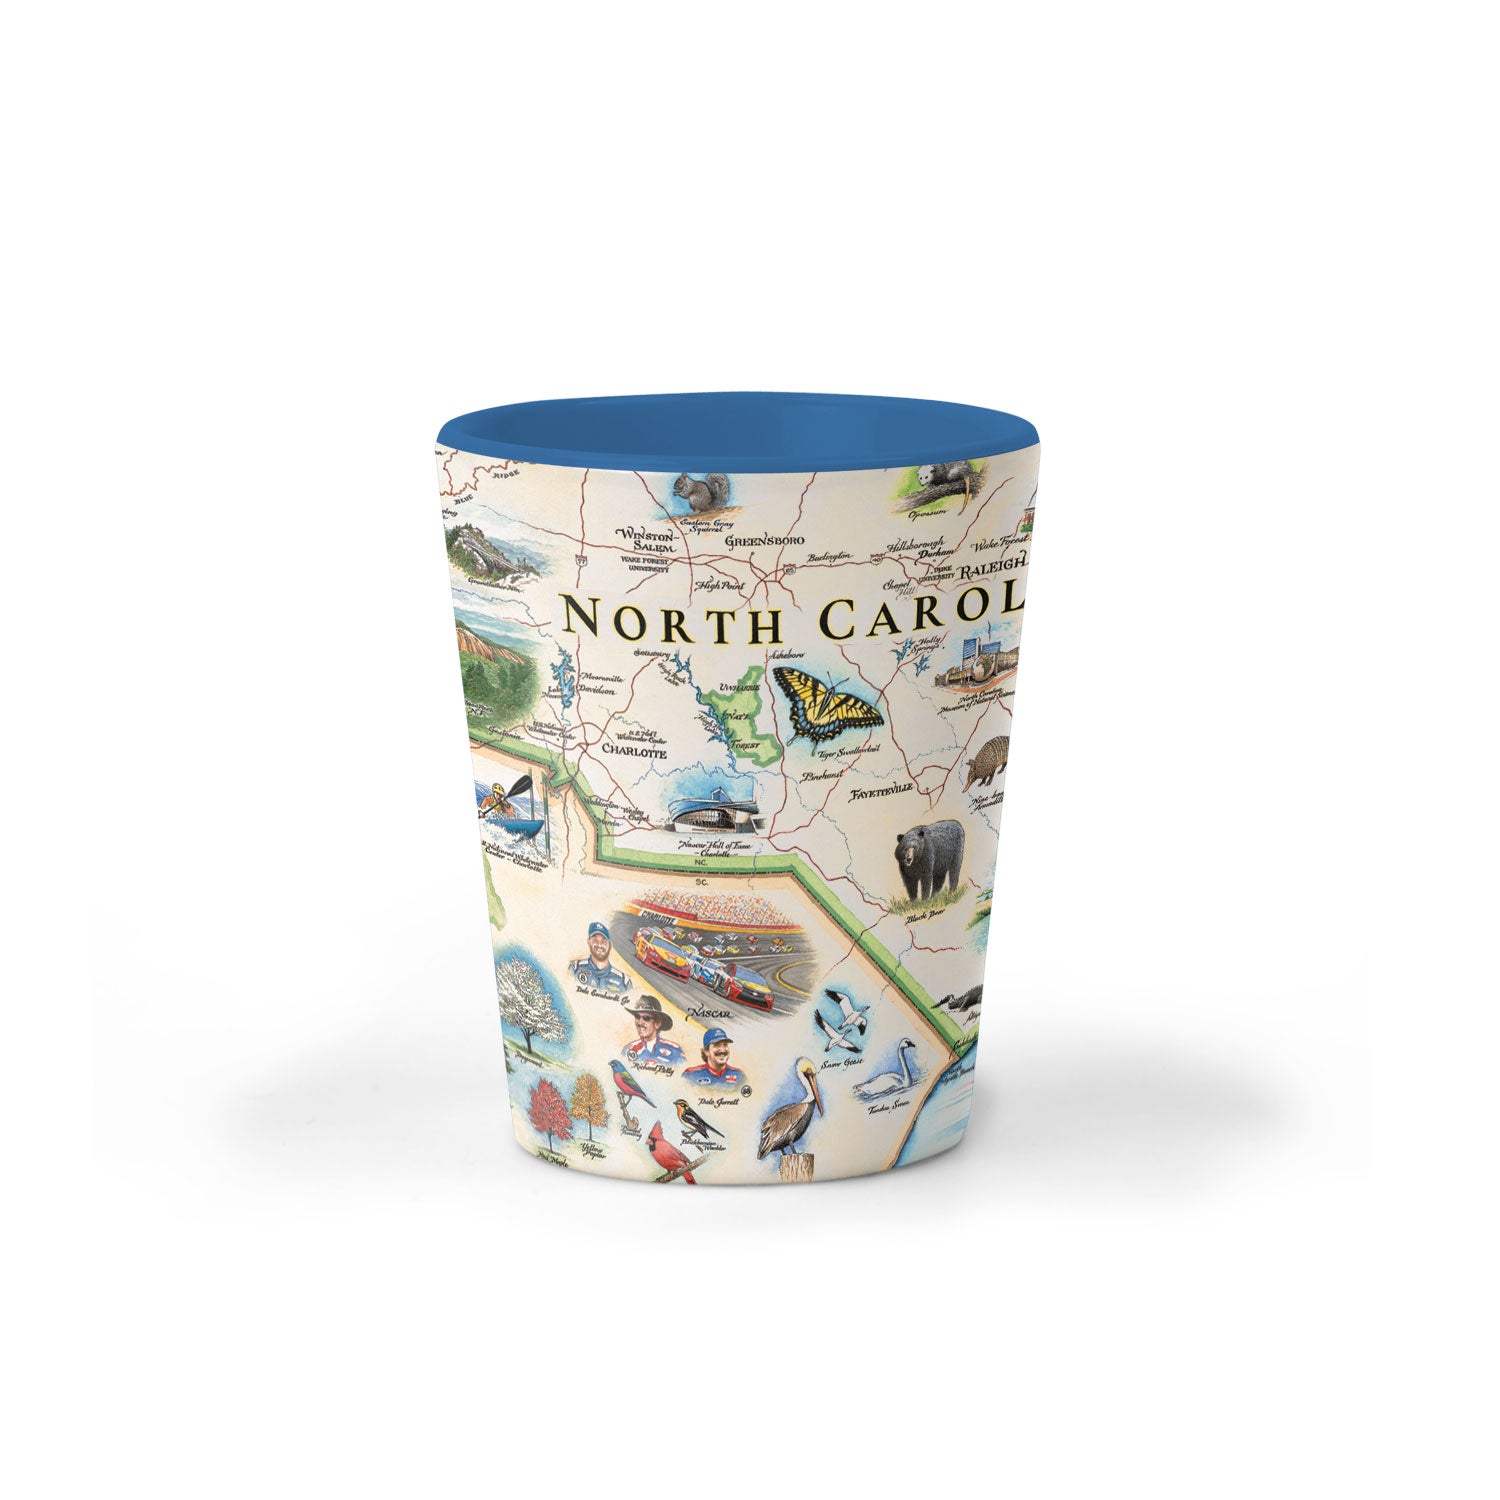 North Carolina Map Ceramic shot glass by Xplorer Maps.  The map features Dry Falls in the Nantahala National Forest, the Outer Banks, a Nascar Hall of Fame, and the USS North Carolina on the coast.